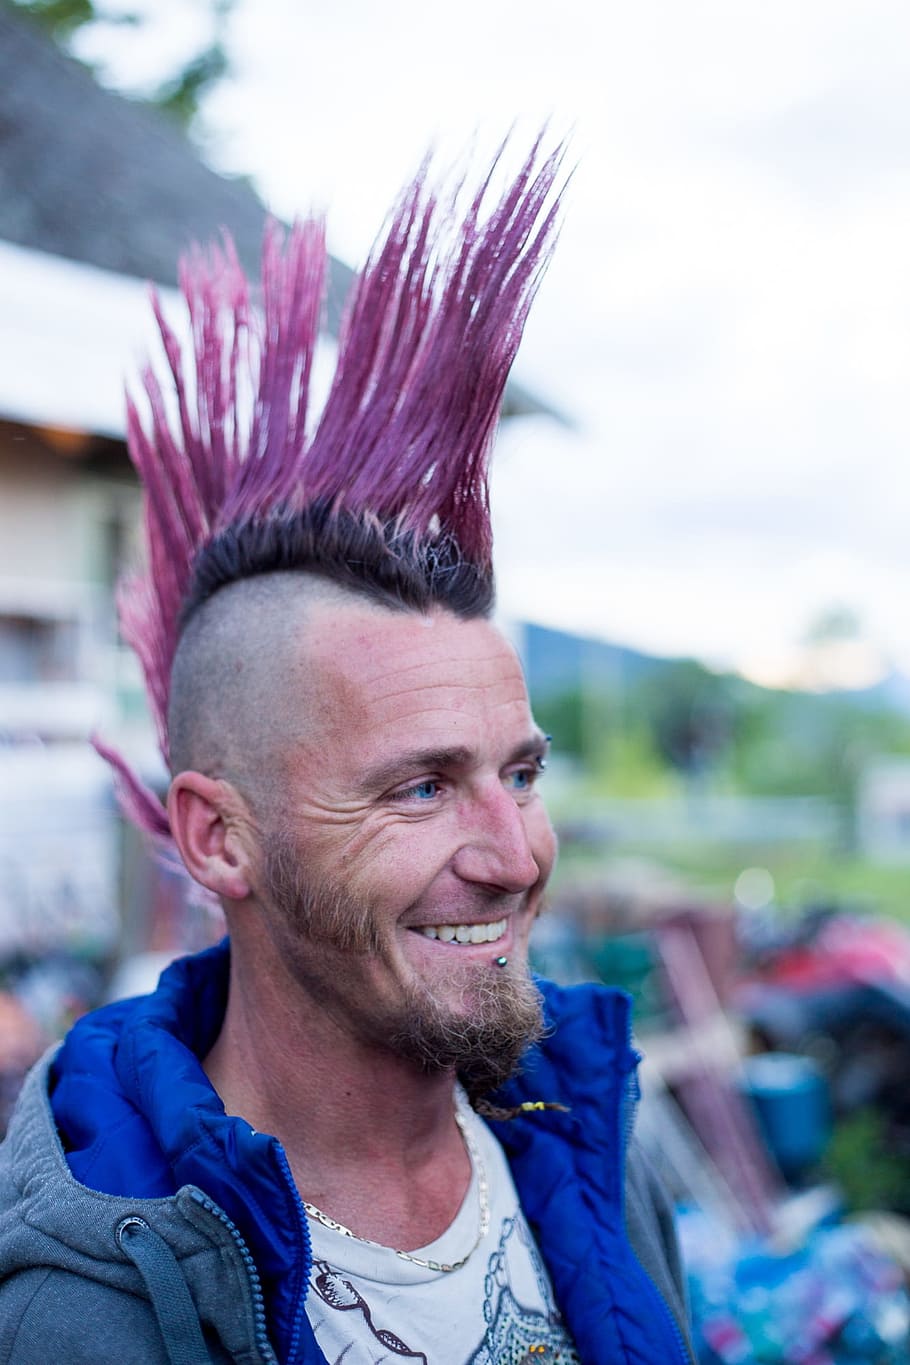 Iroquois, Punk, Mohawk, Purple, hair style, pink, smiling, headshot, adults only, portrait